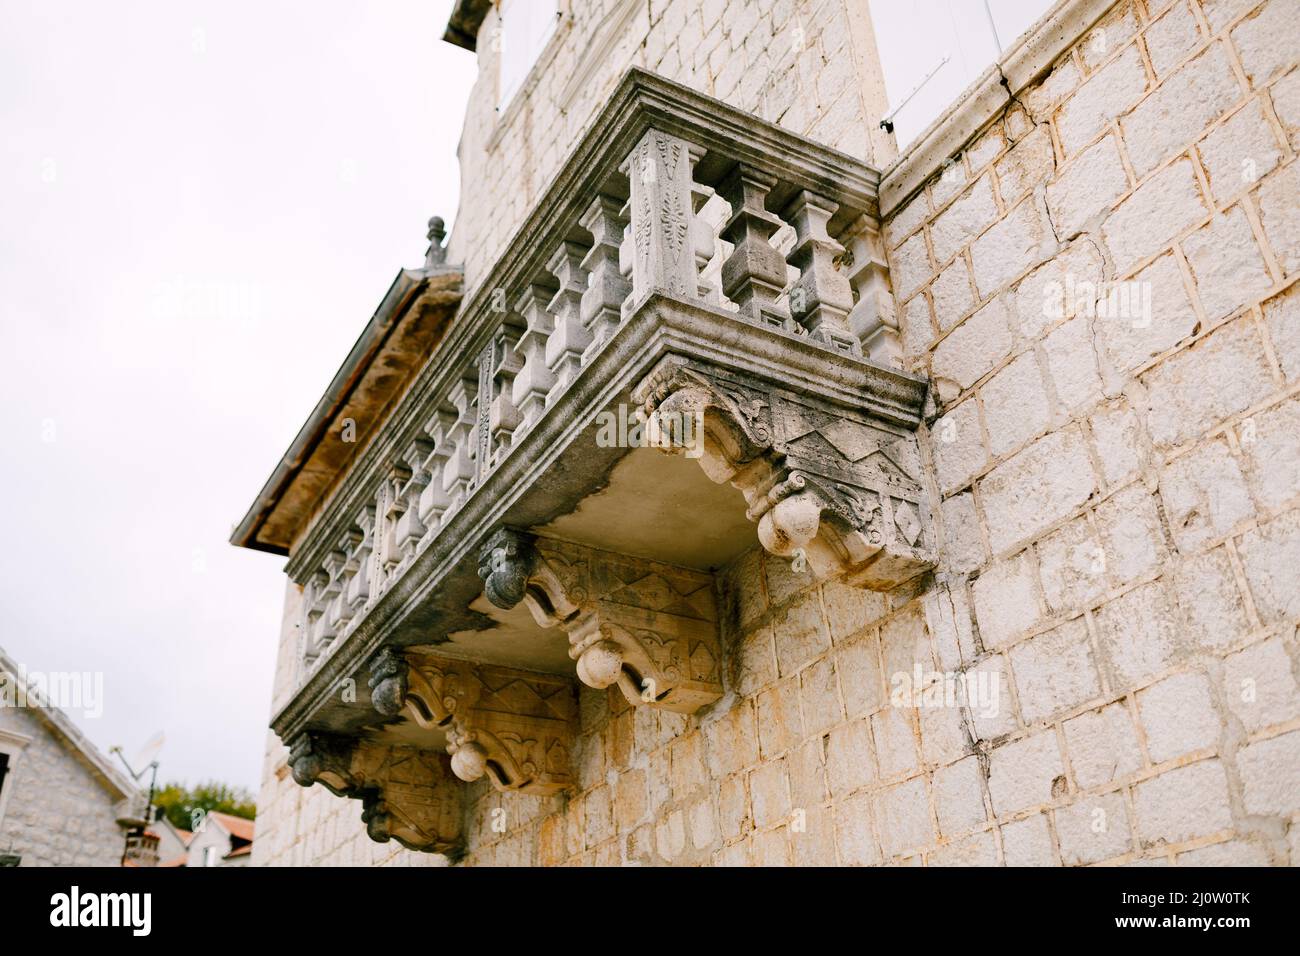 Carved stone balcony on the facade of the building with carved balusters Stock Photo